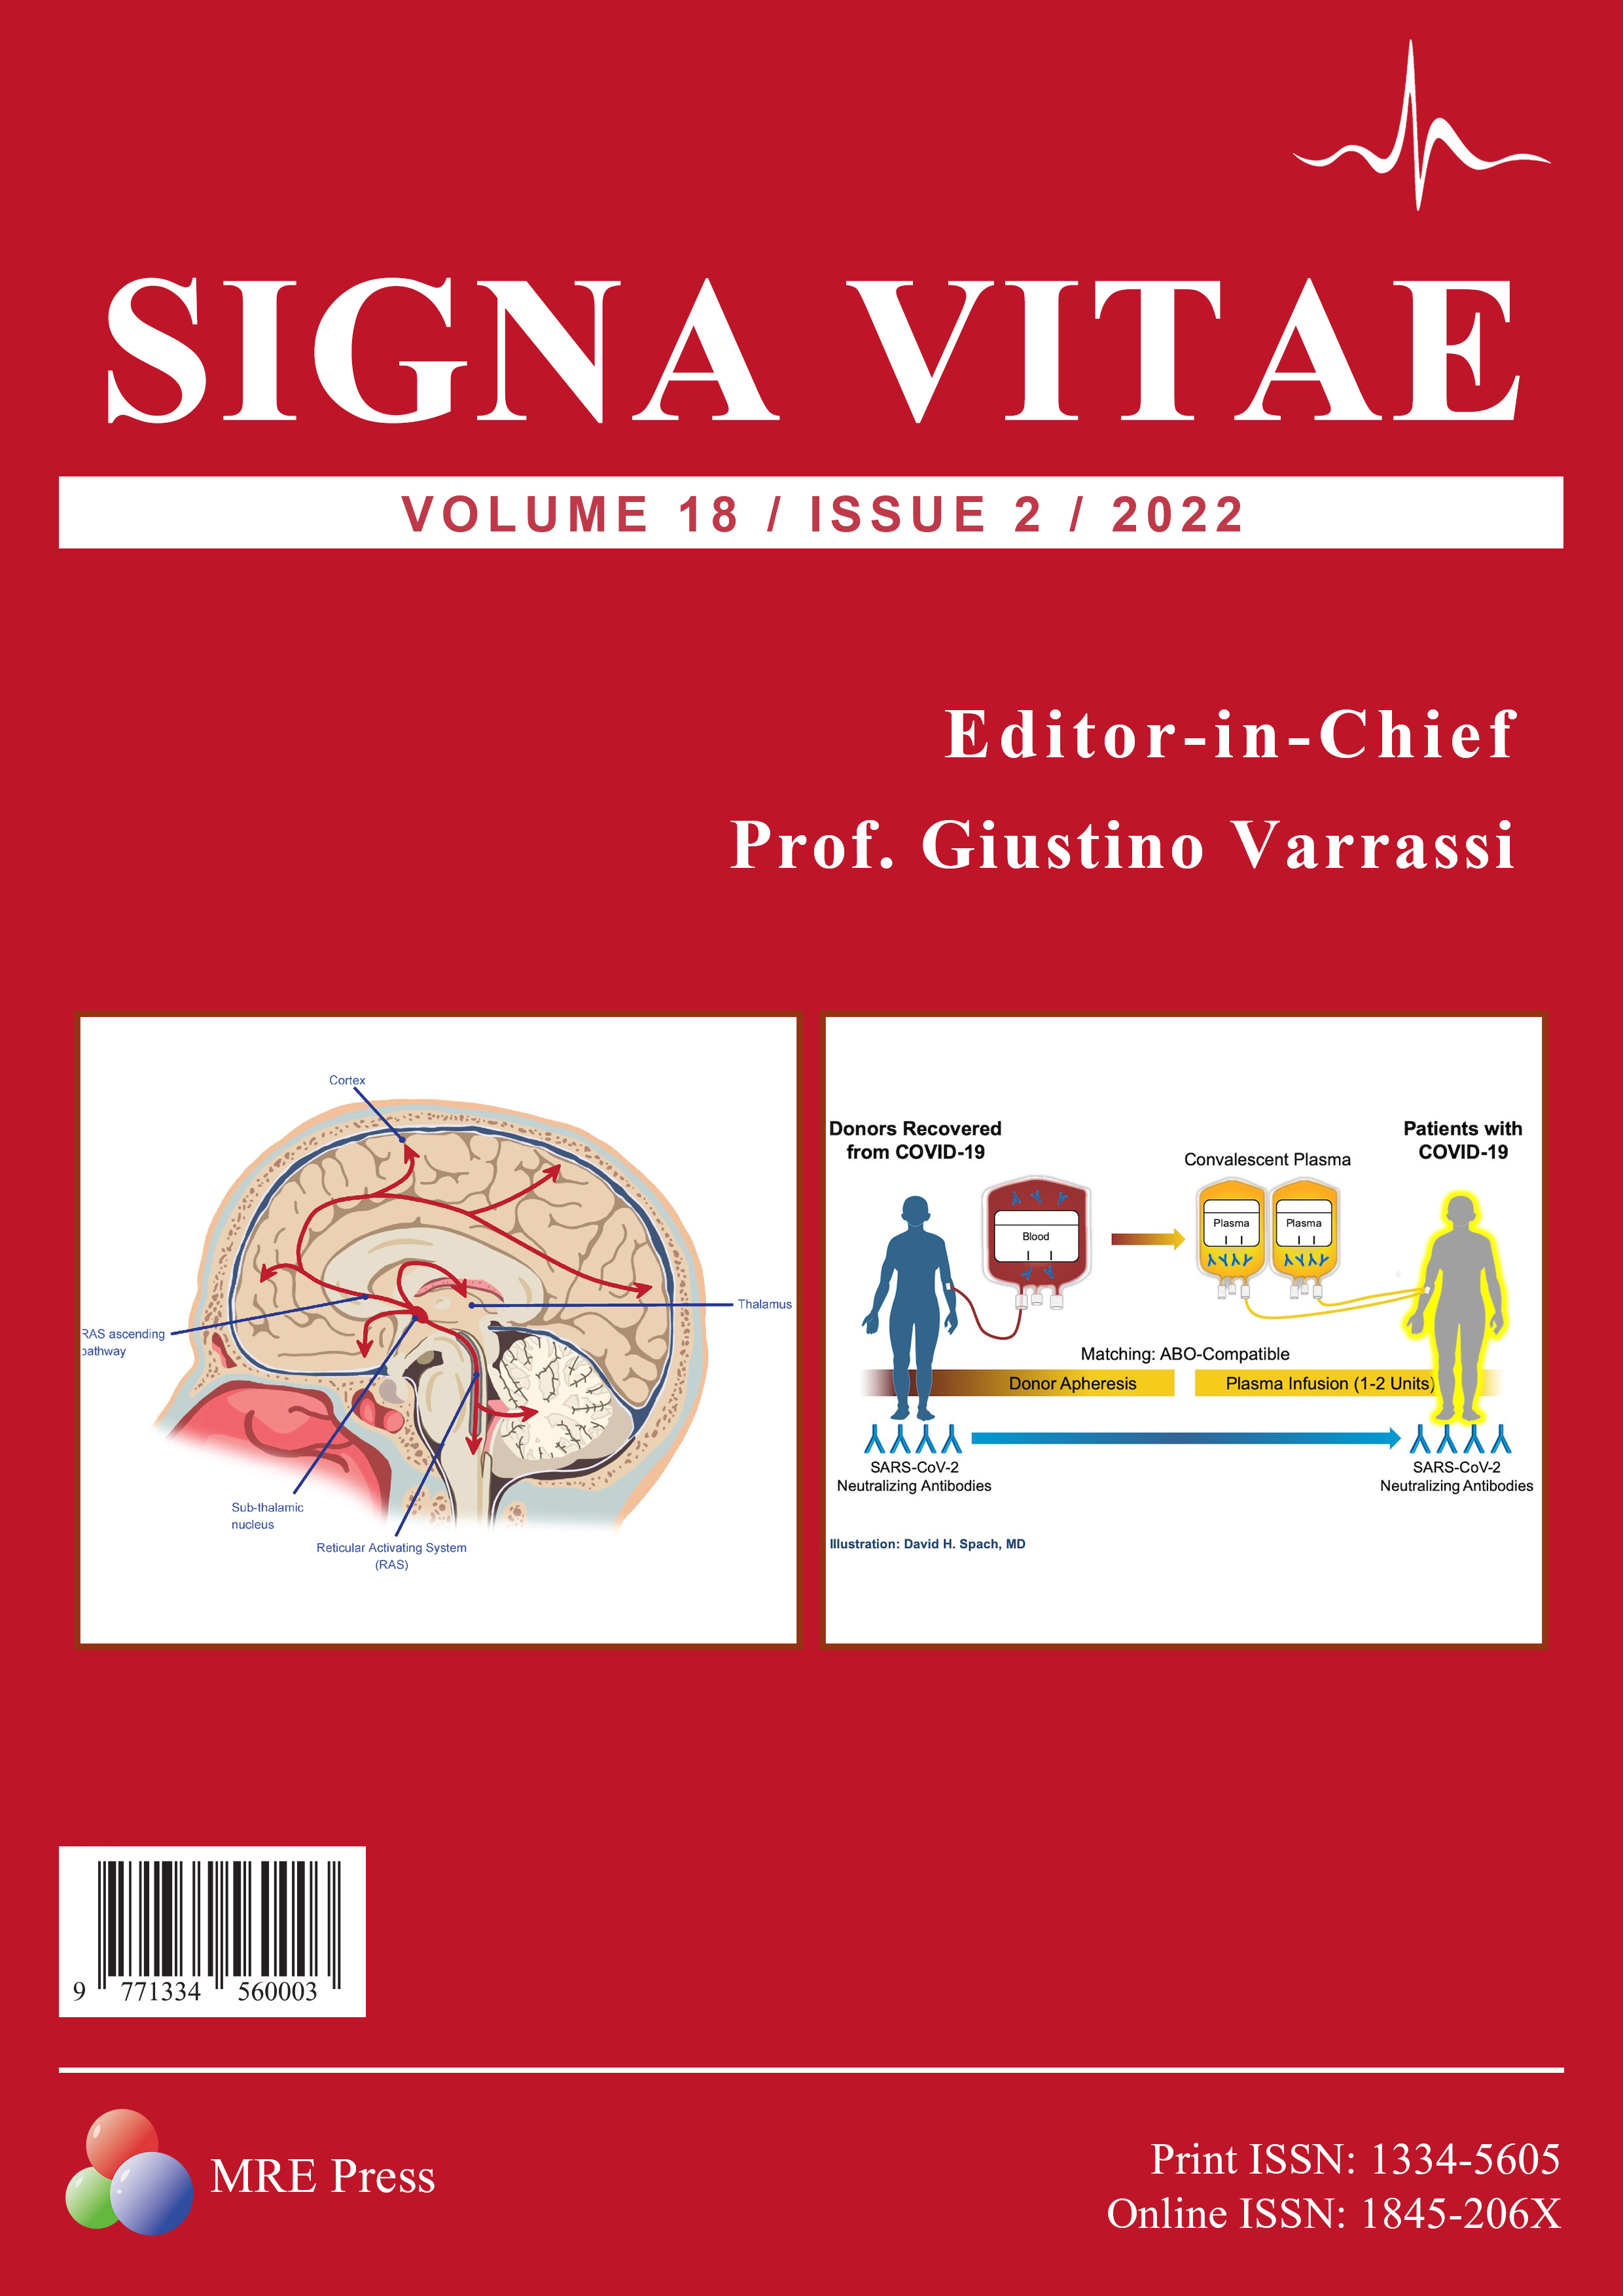 Signa Vitae-Journal of Anesthesiology, Intensive Care Journal 